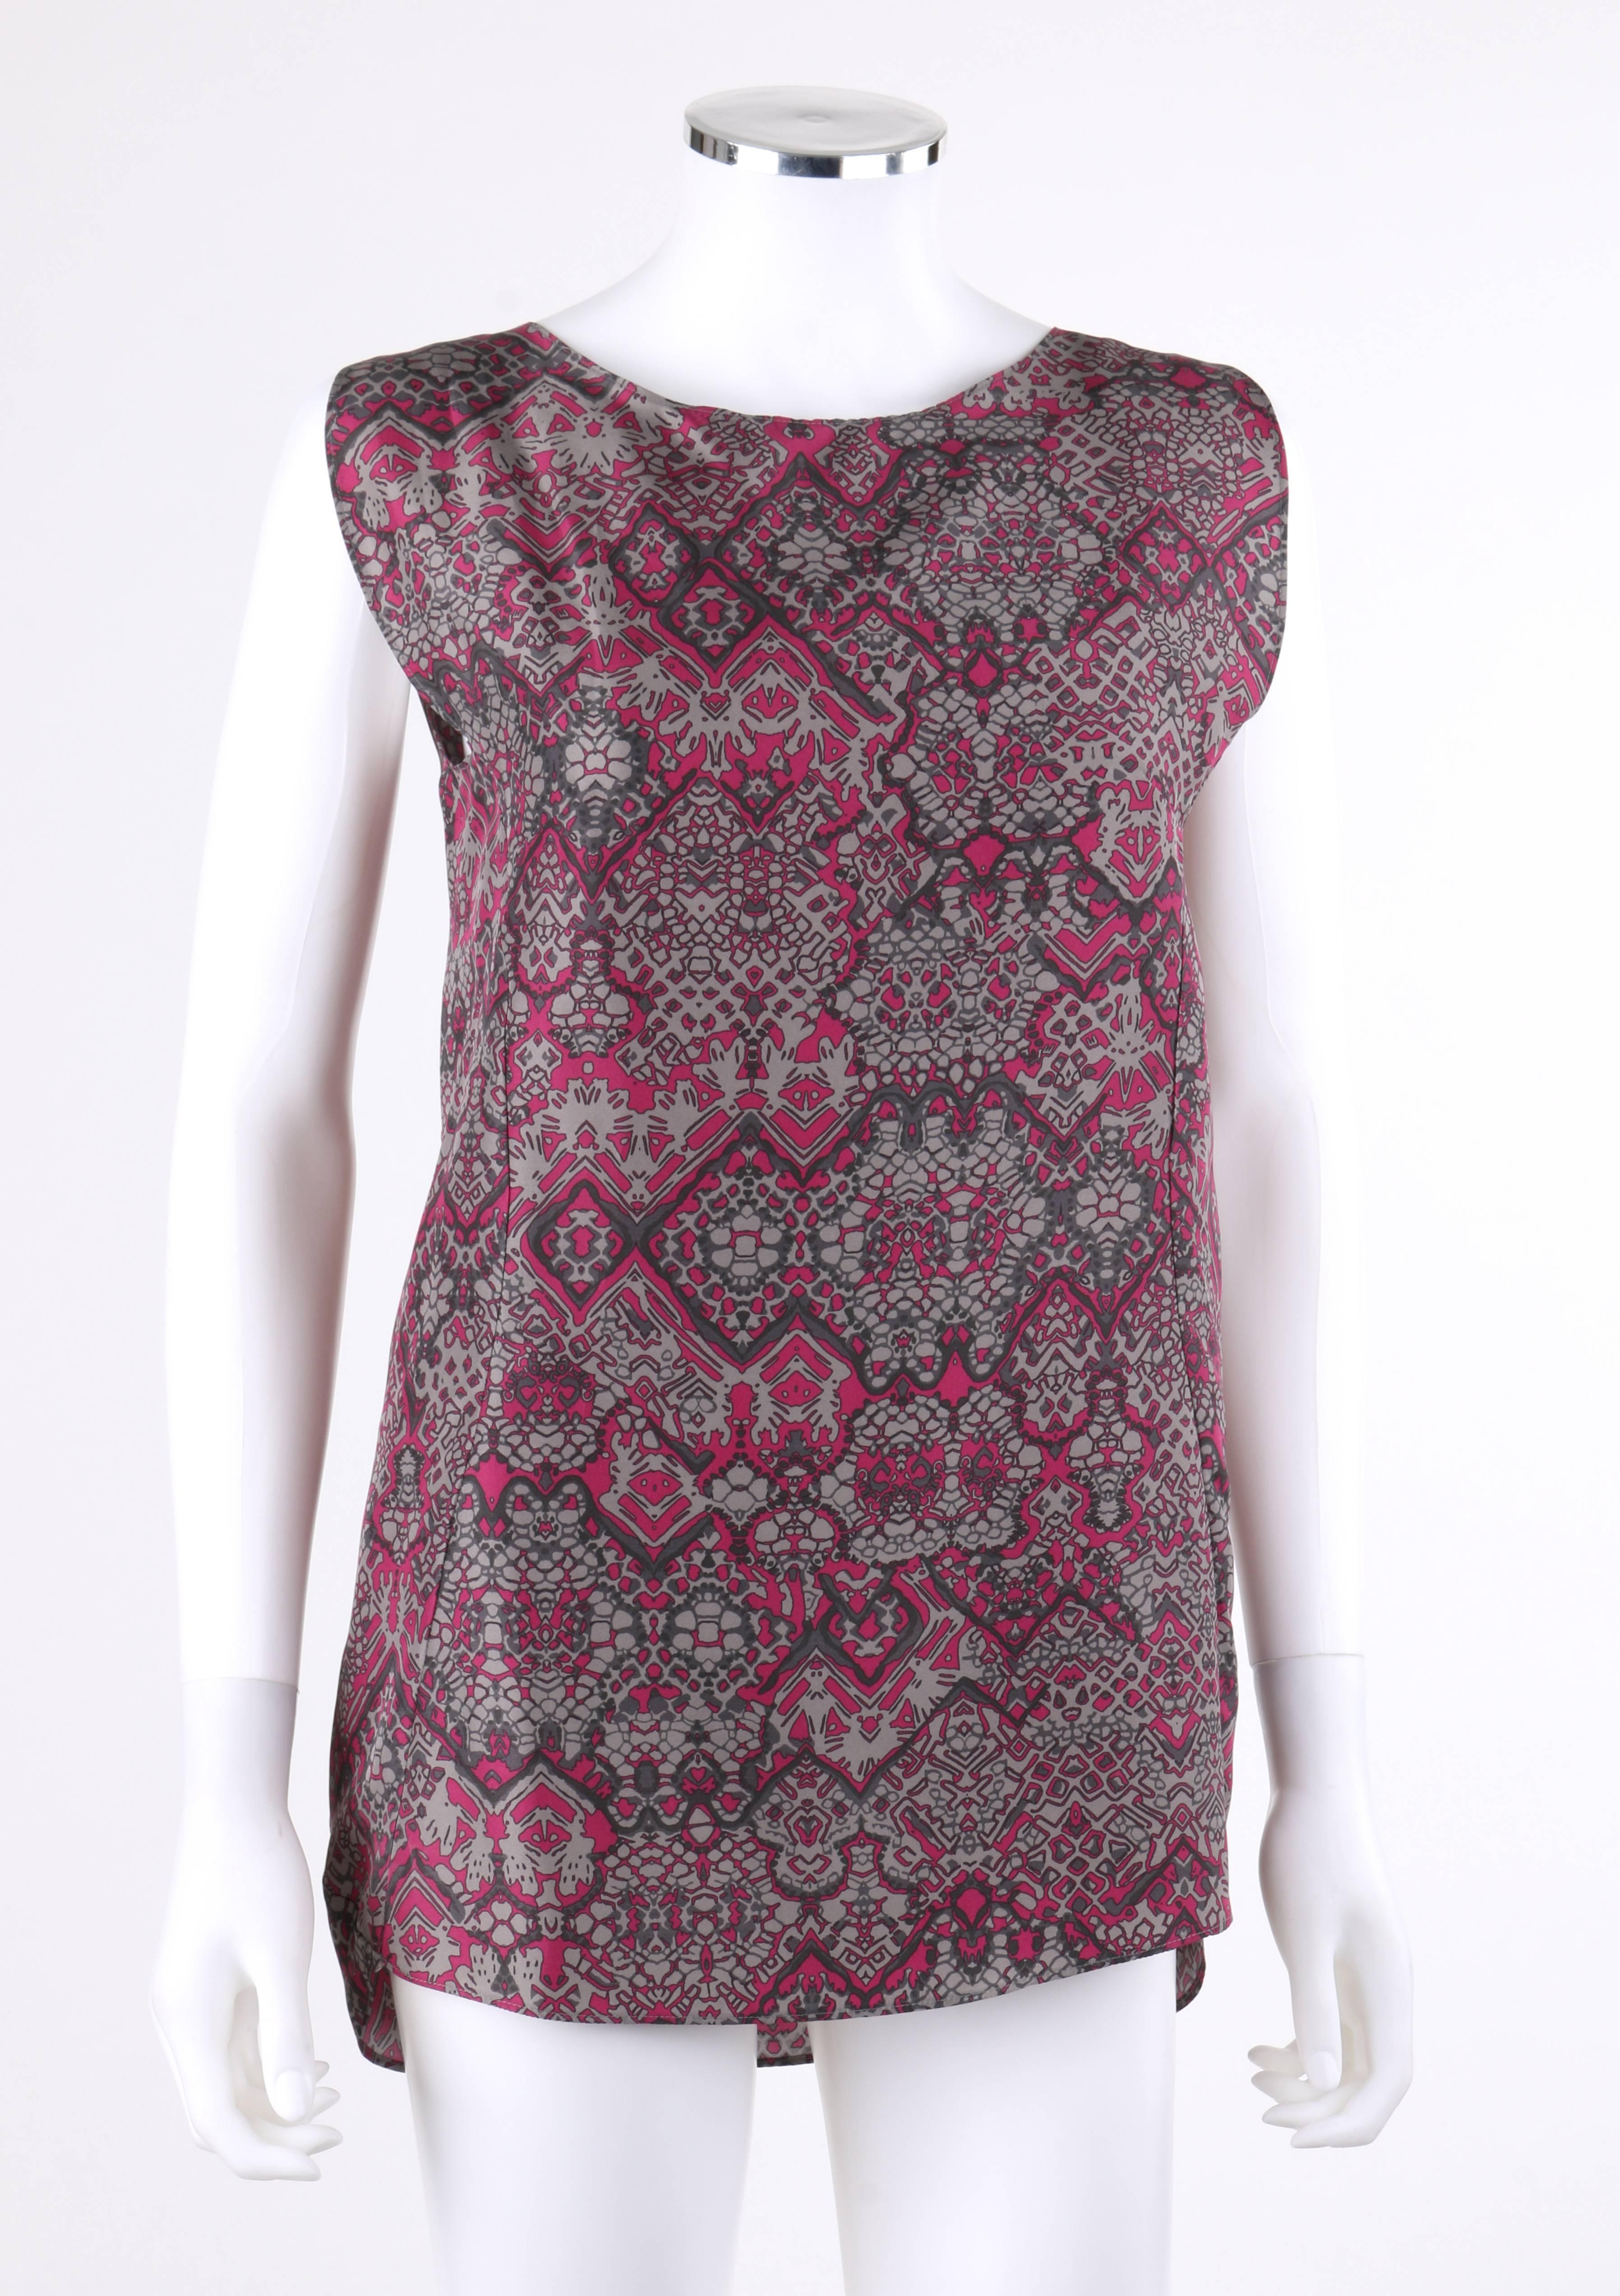 Yves Saint Laurent Spring/Summer 2012 Gray and magenta abstract print silk blouse; New with tags. All over abstract kaleidoscope pattern in shades of gray and magenta. Wide scoop neckline. Extended shoulders. Princess seams for contoured shape.